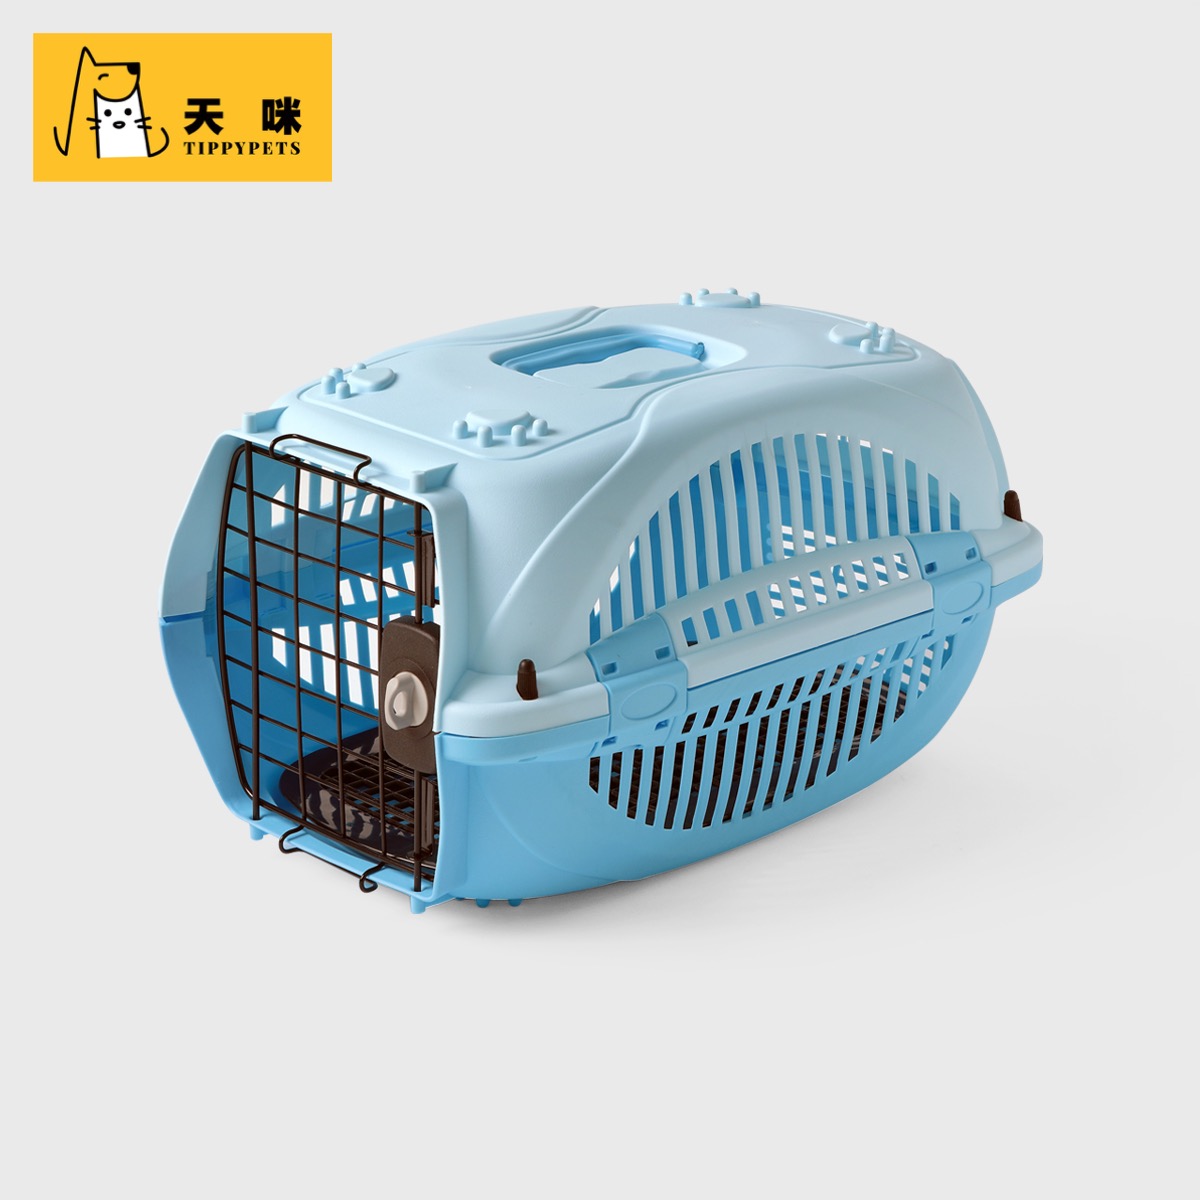 Tippy Pets New IATA Standard Pet Carrier Kennel Pet Cage Pet Travel Kennel For Dog and Cats